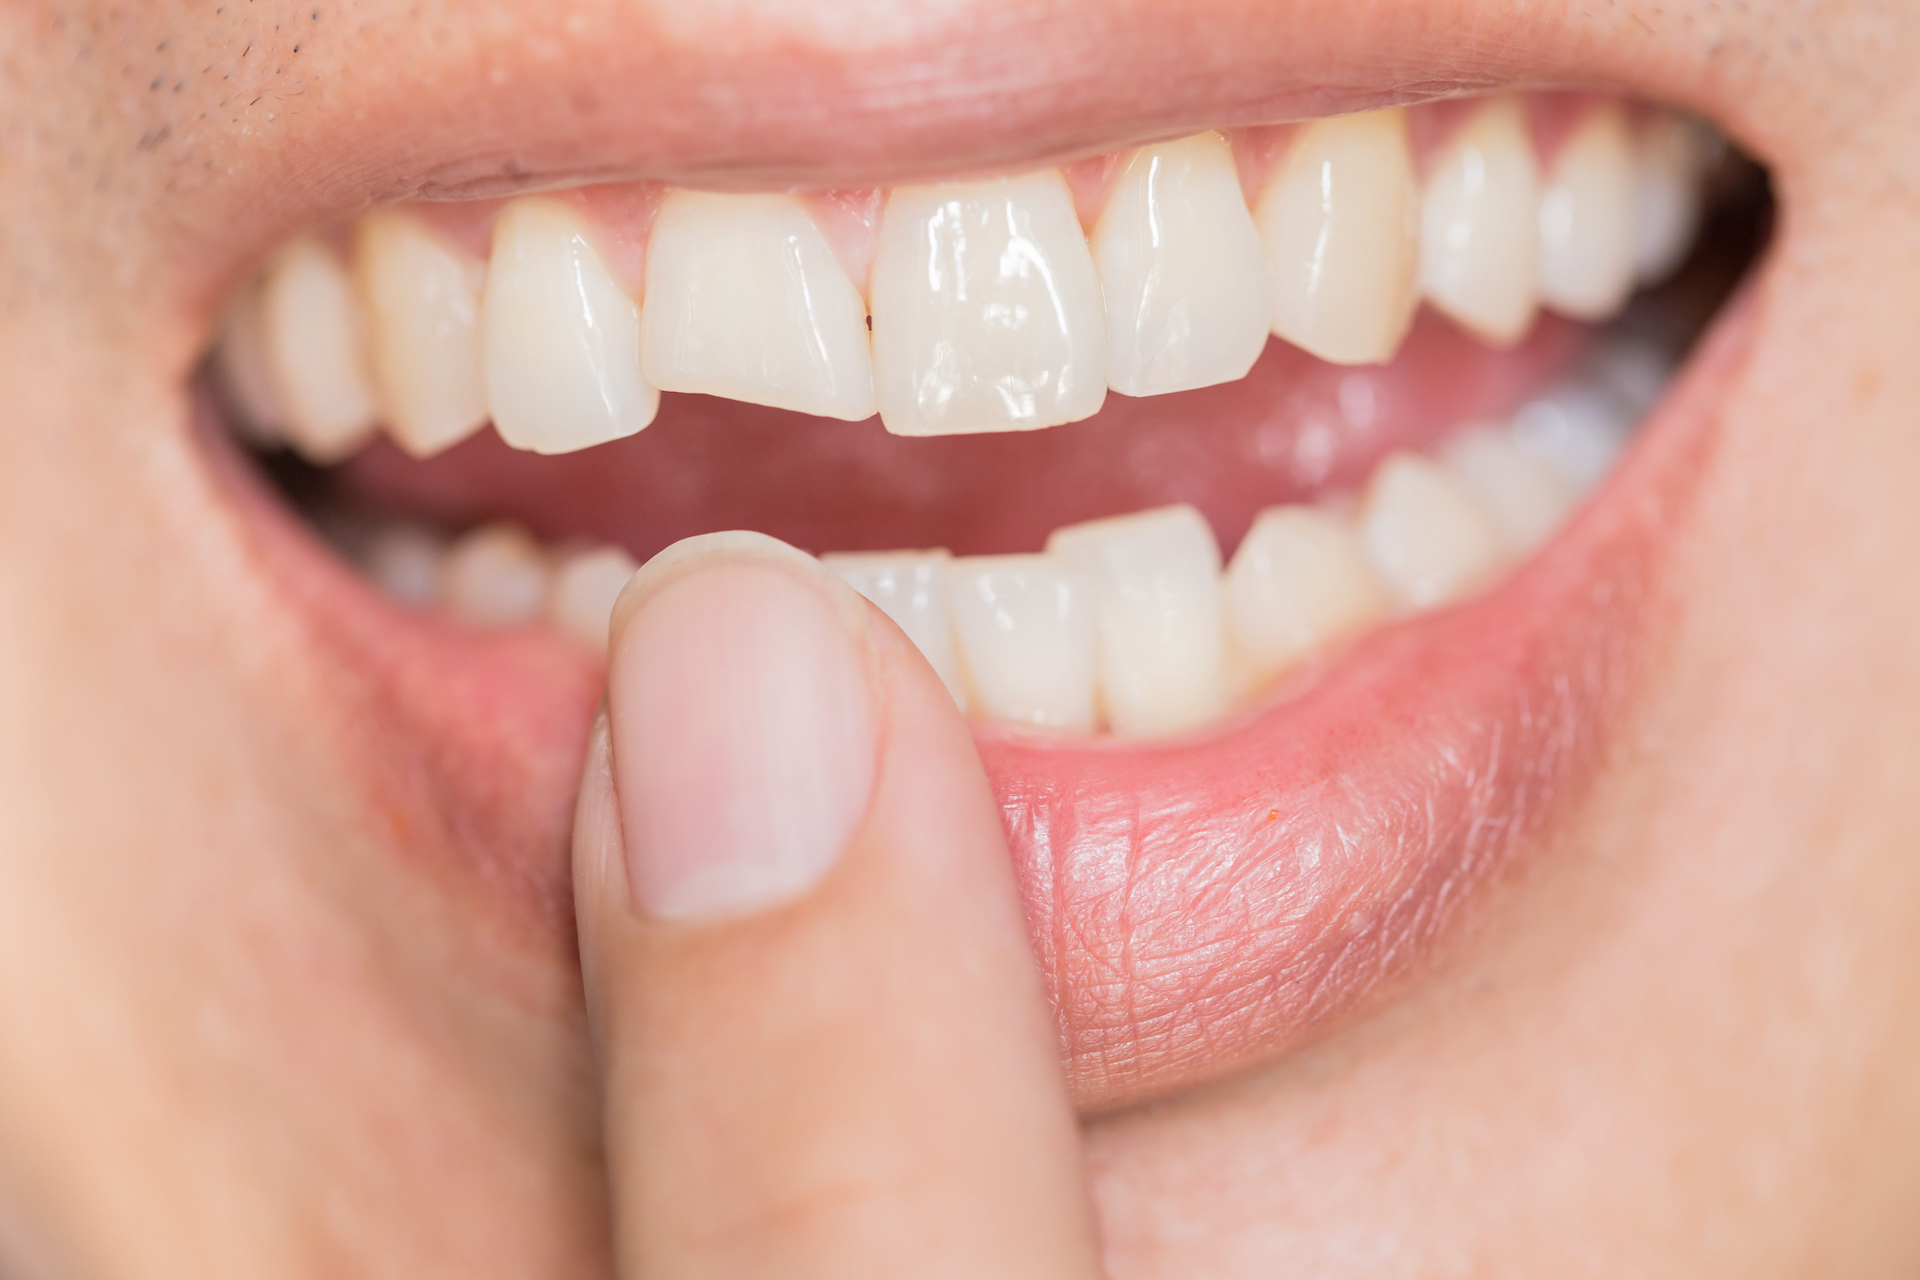 Treatment Options for Cracked or Fractured Teeth